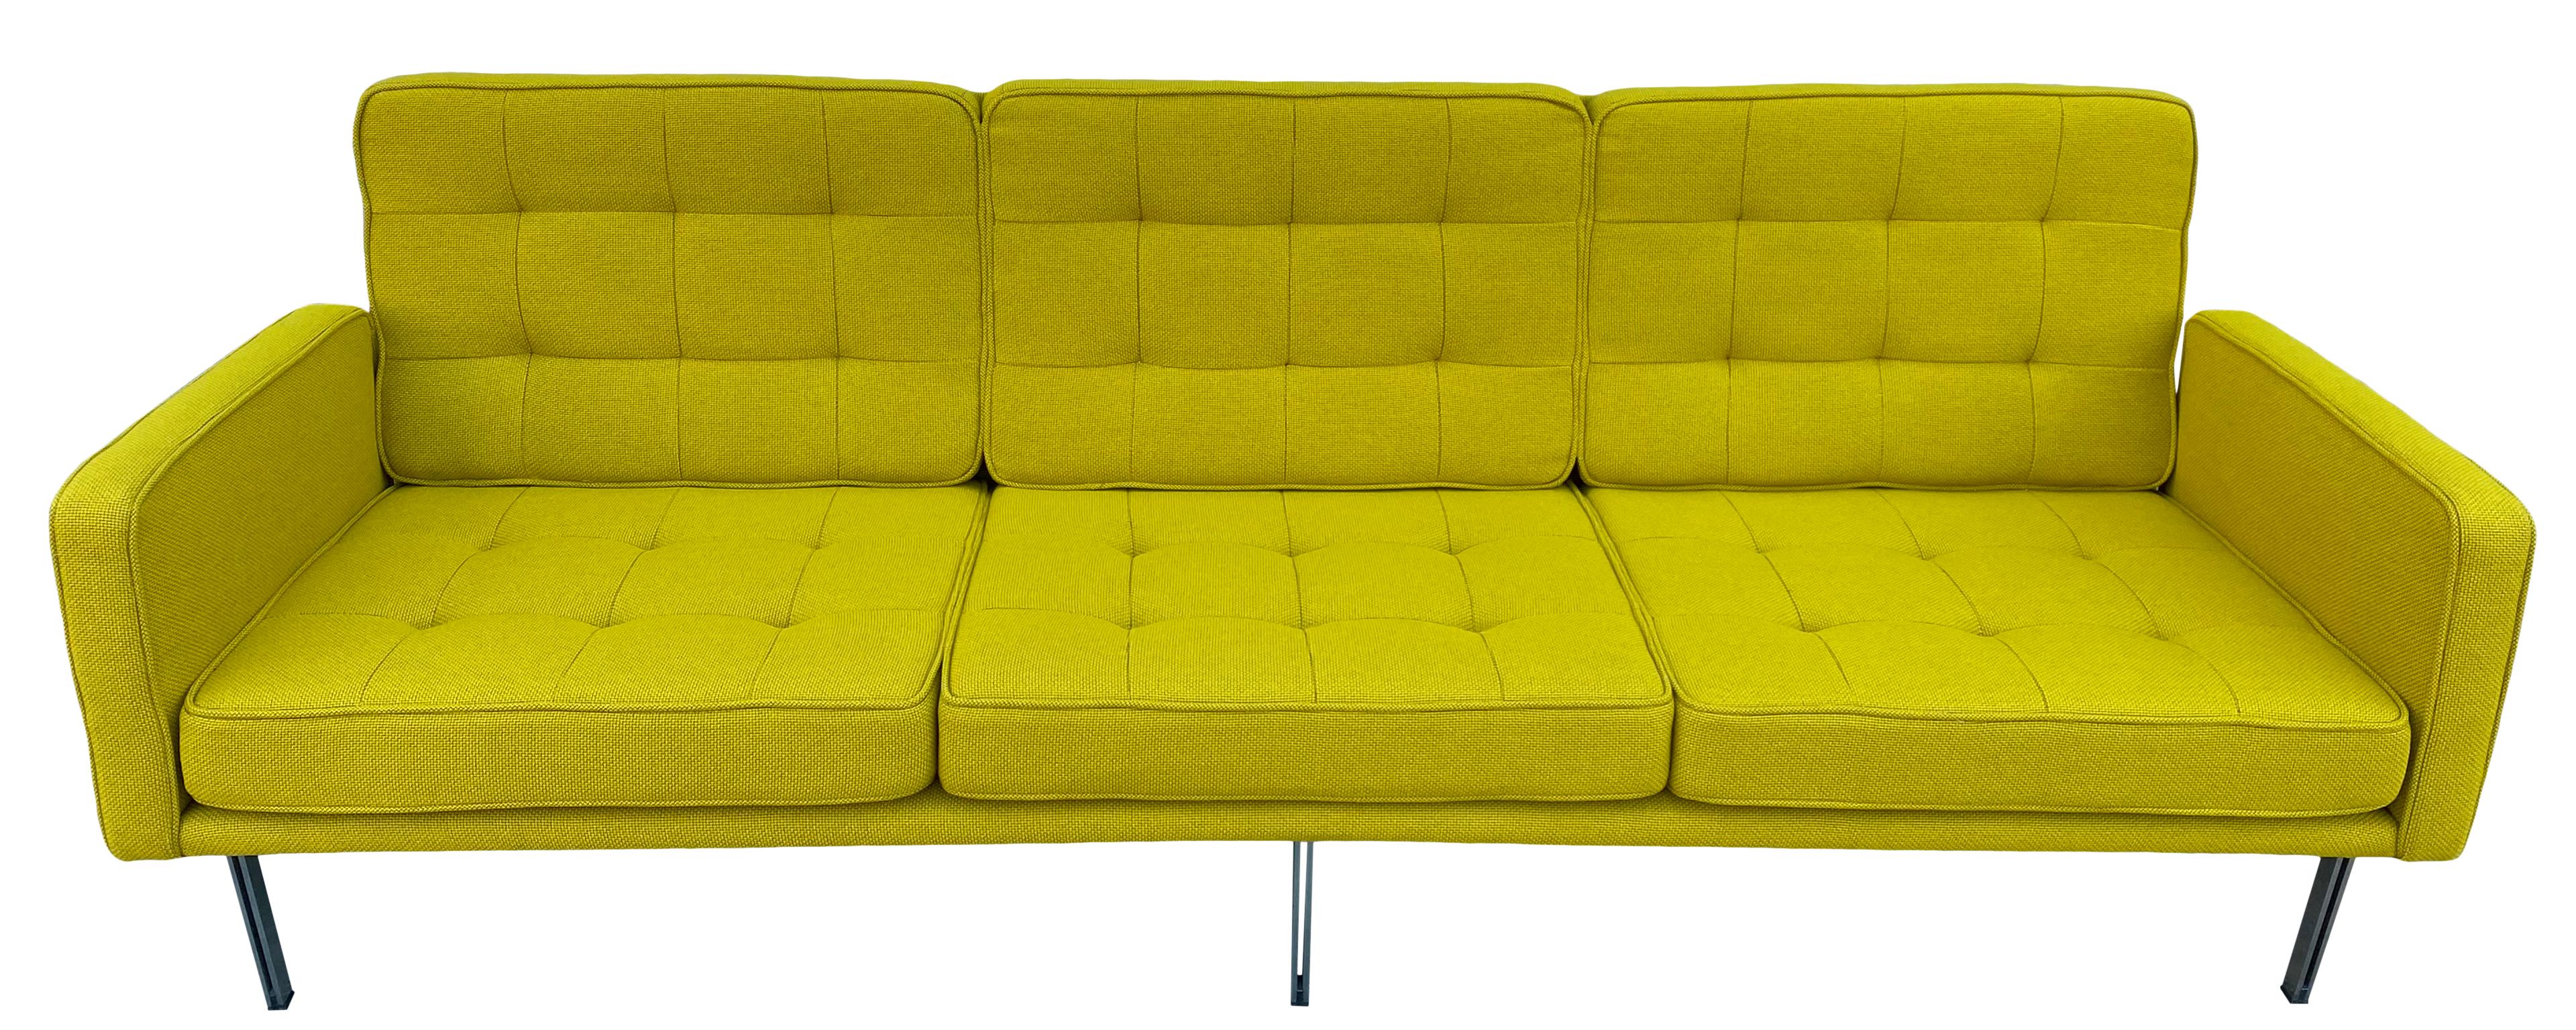 Incredible rare vintage circa 1960 Midcentury Florence Knoll Parallel Bar System sofa Model #57 three-seat sofa with arms. Designed by Florence Knoll for Knoll Int. USA. Solid Steel frame has New Knoll Uni-form Woven ochre upholstery. All new foam